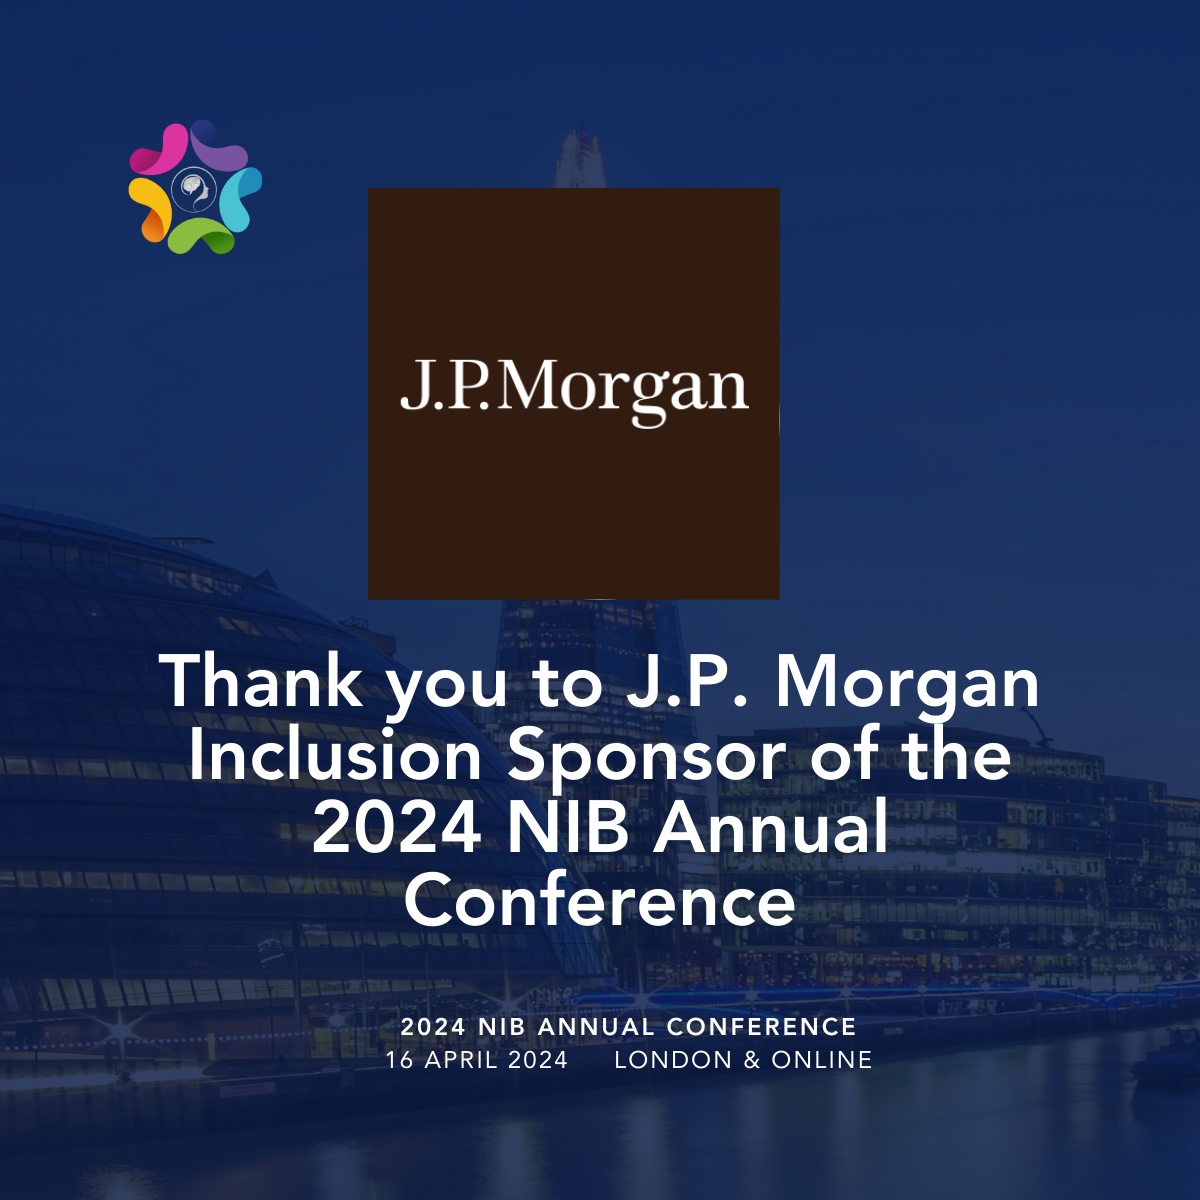 Thank you to our Inclusion Sponsor @JPMorgan for supporting the 2024 NiB Annual Conference. View the livestream here: linkedin.com/events/7184556… #Neurodiversity #NeurodiversityInBusiness